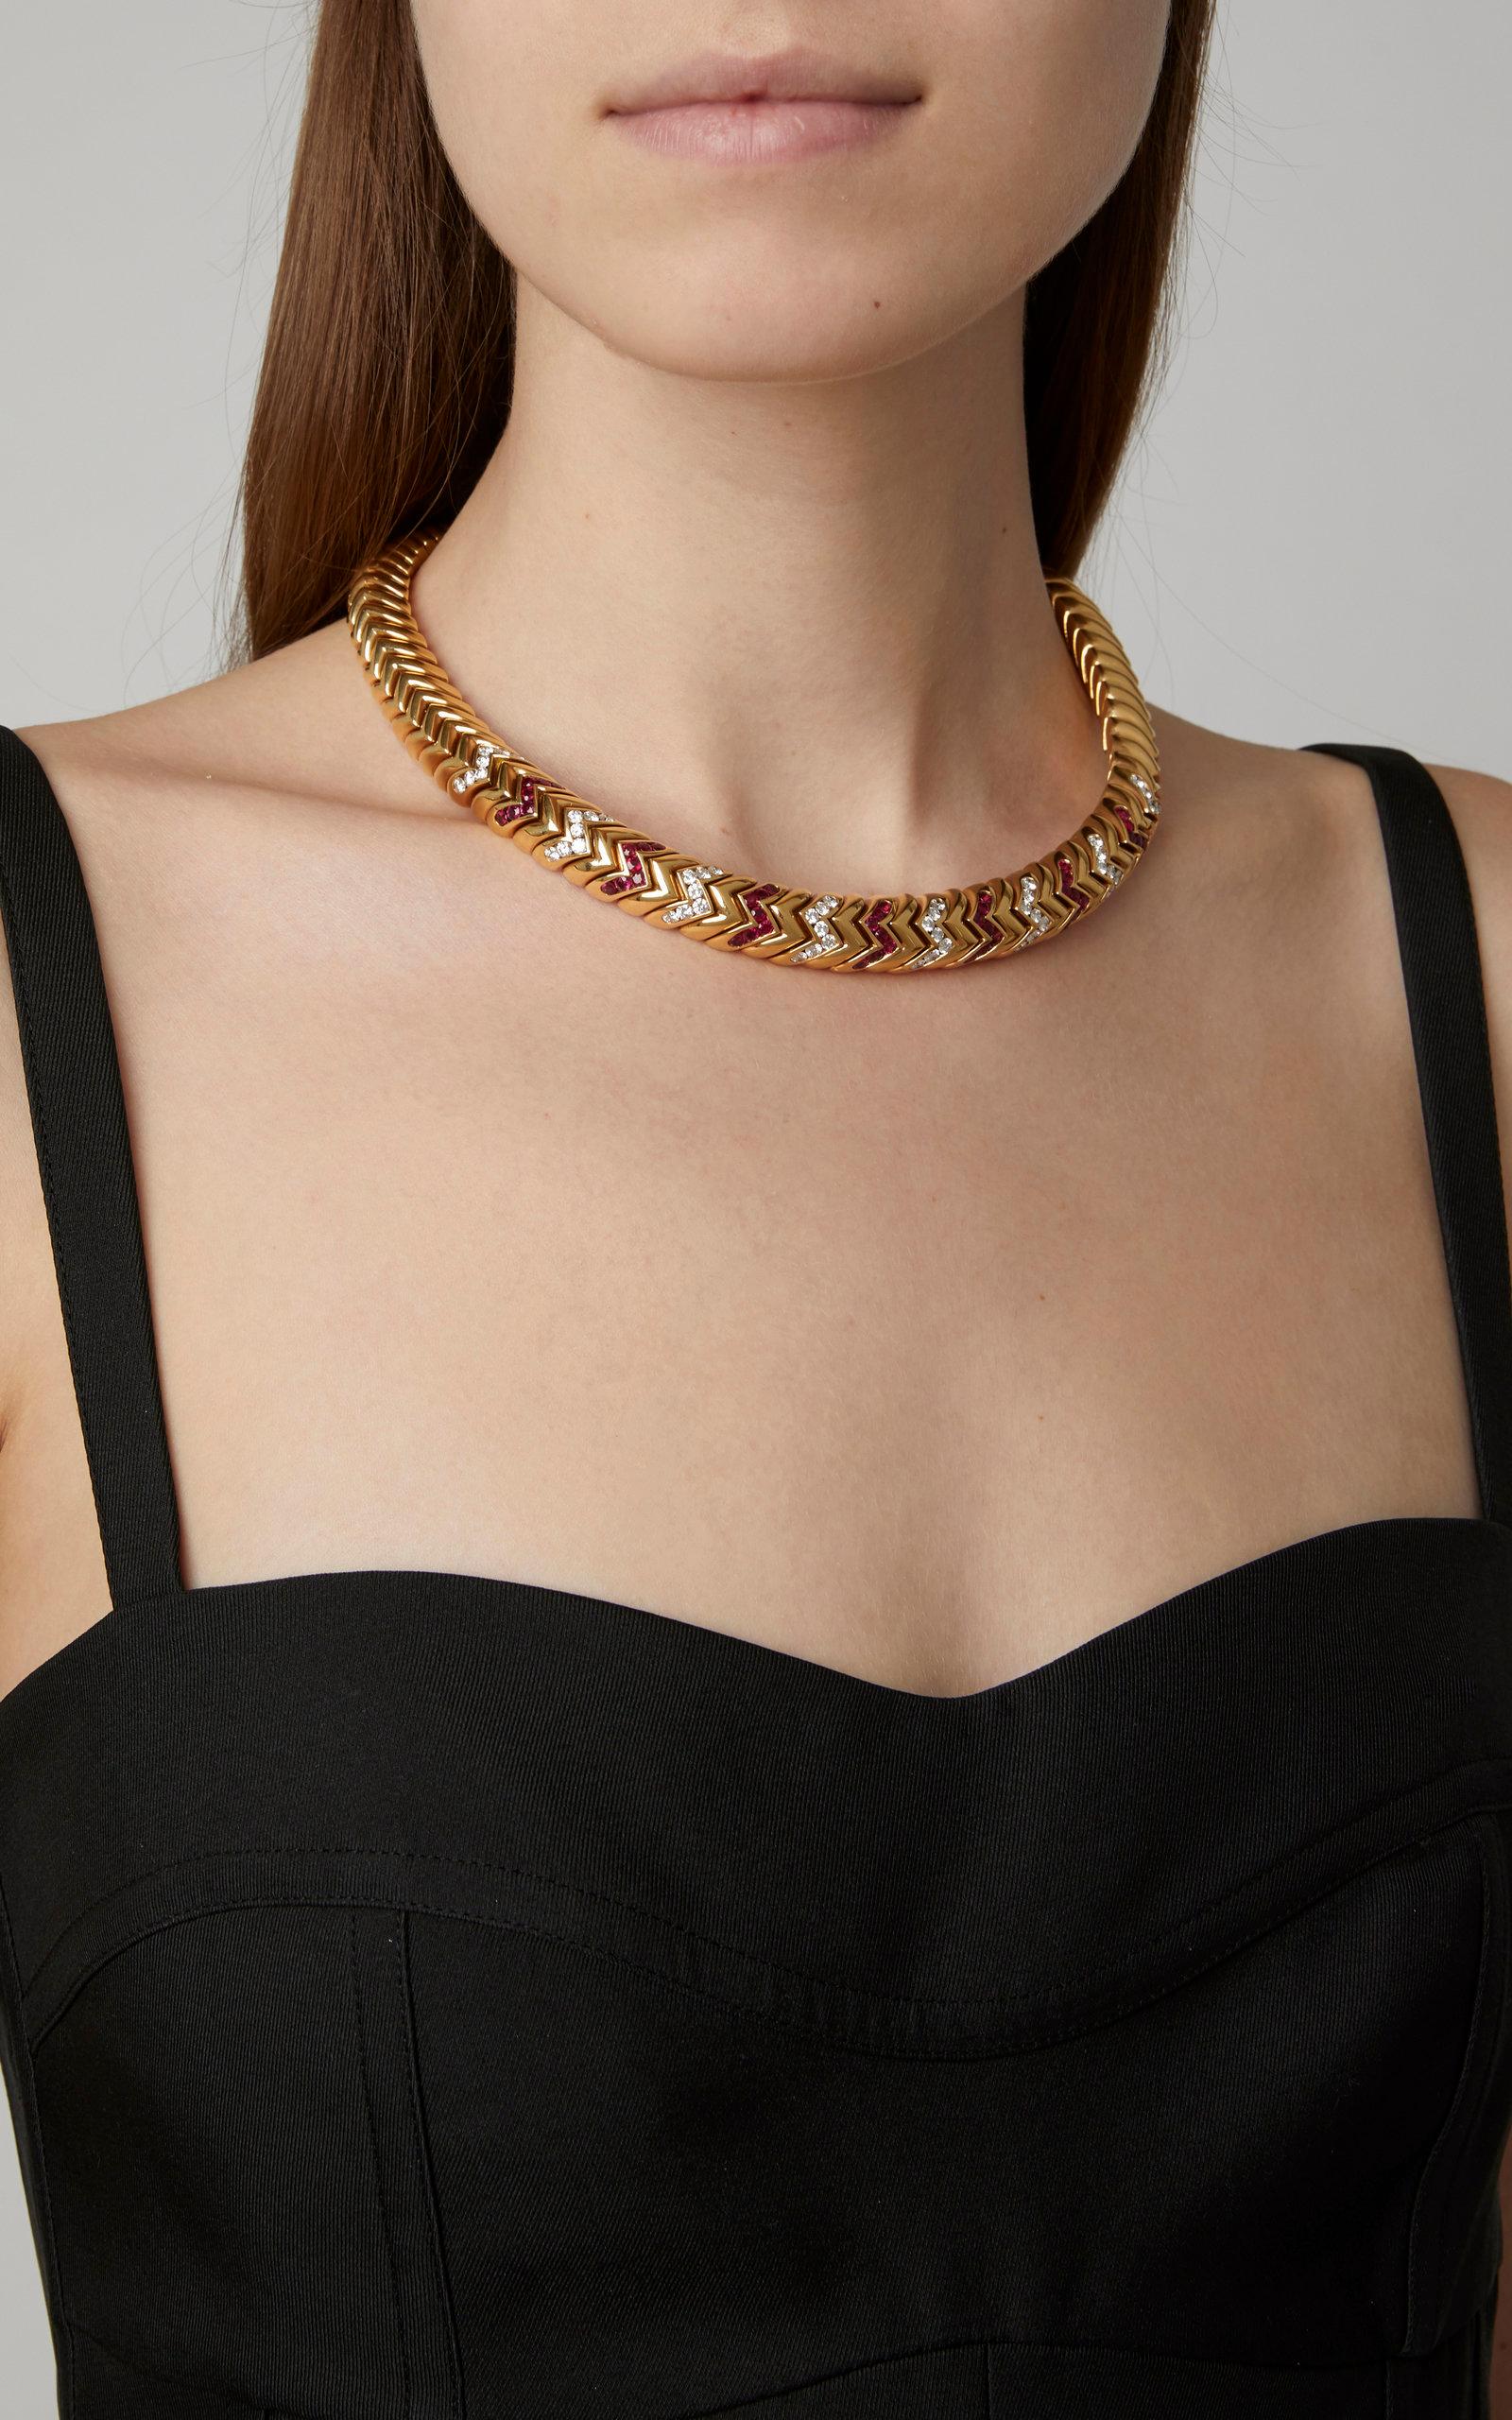 A Bulgari necklace from the iconic 